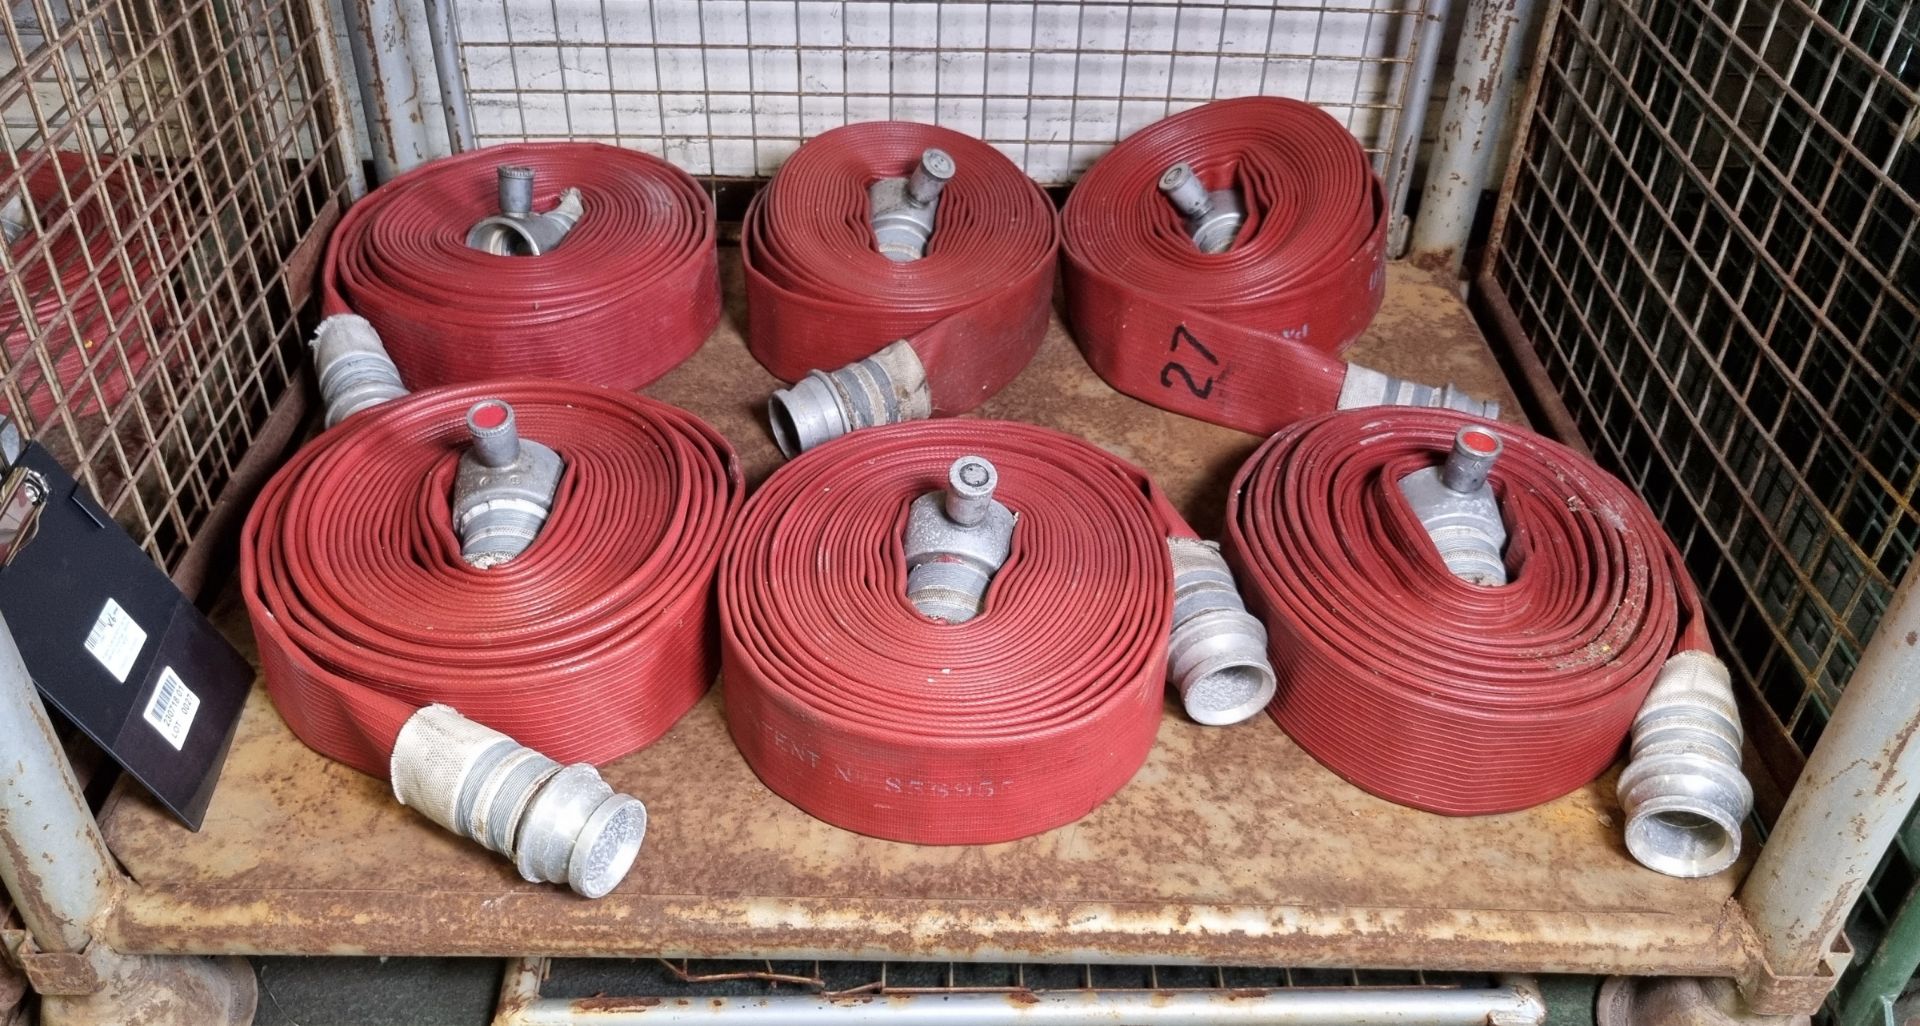 6x Angus Duraline 64mm lay flat hoses with couplings - approx 15m in length